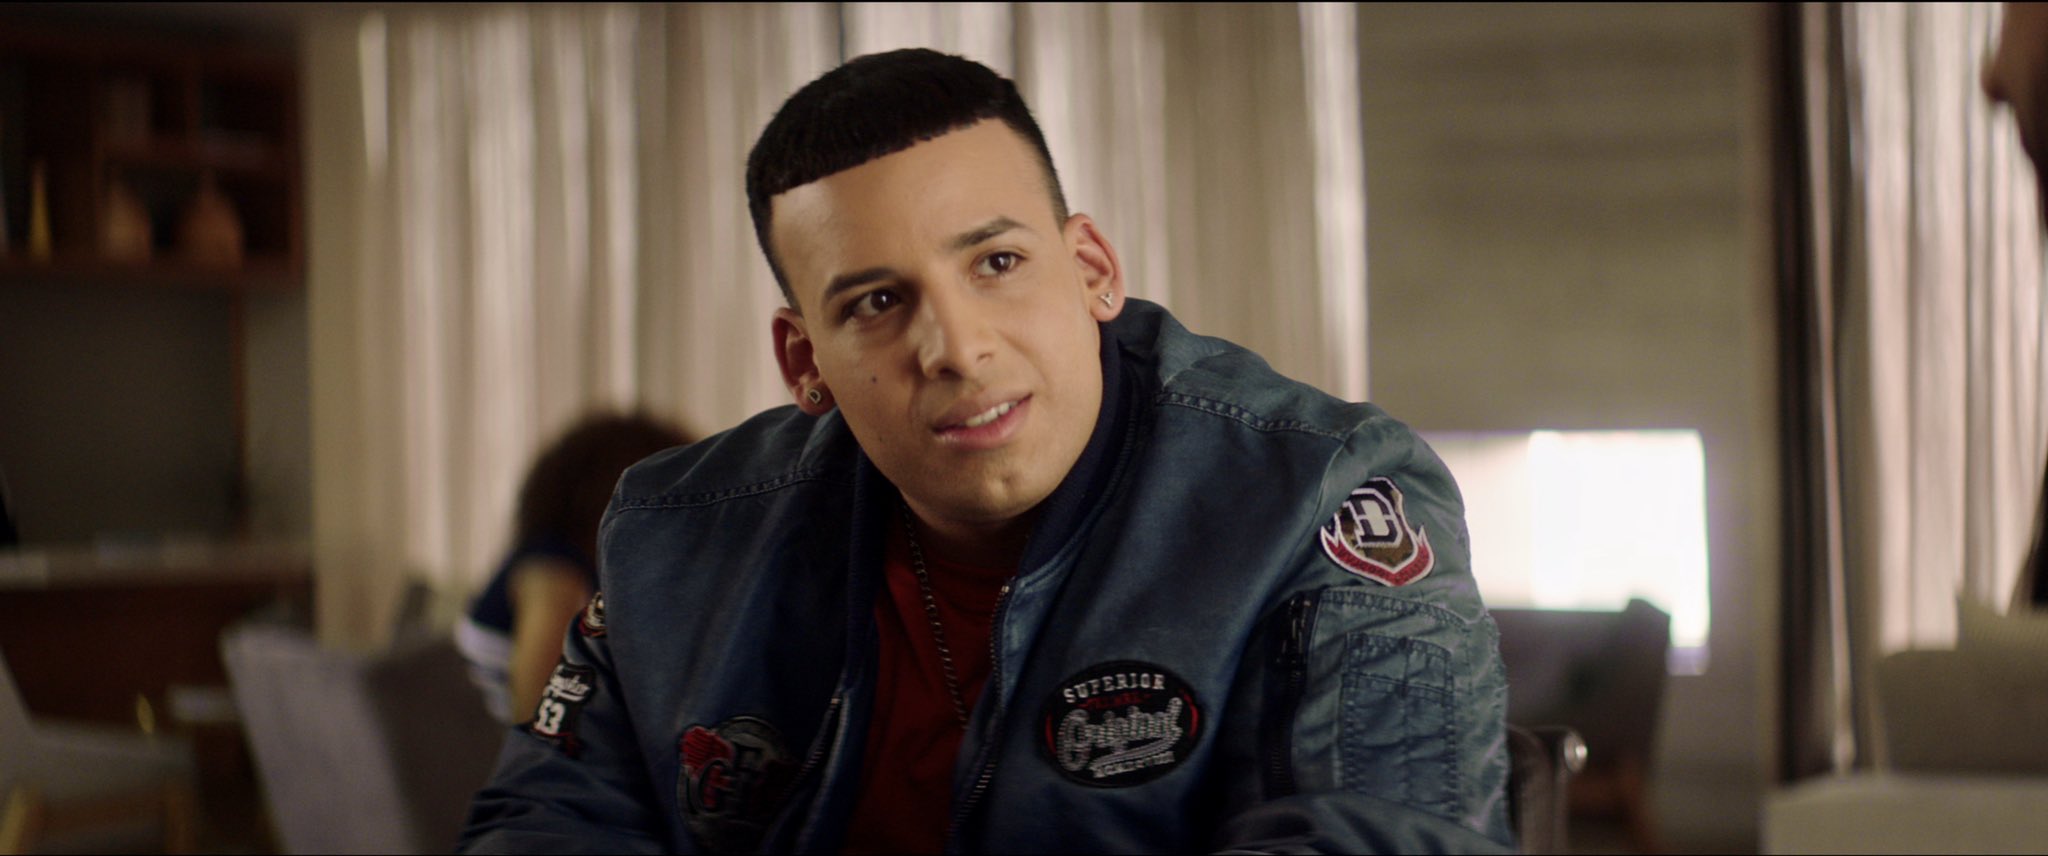 Daddy Yankee - Age, Songs & Wife